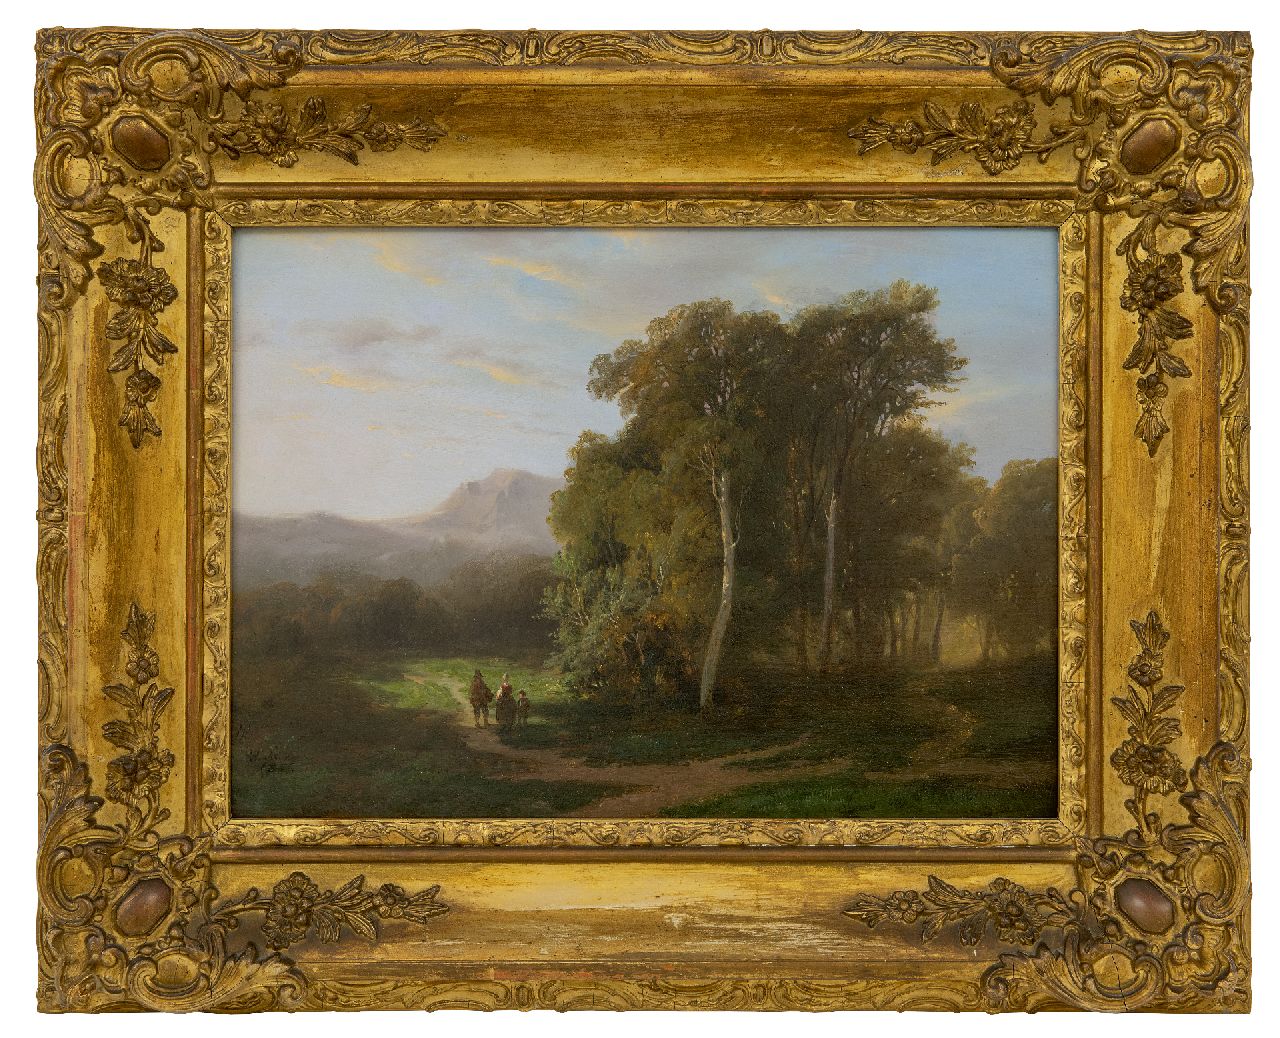 Hanedoes (Toegeschreven aan) L.  | Louwrens Hanedoes (Toegeschreven aan) | Paintings offered for sale | Country people in a mountainous landscape, oil on panel 27.5 x 38.5 cm, dated 1851